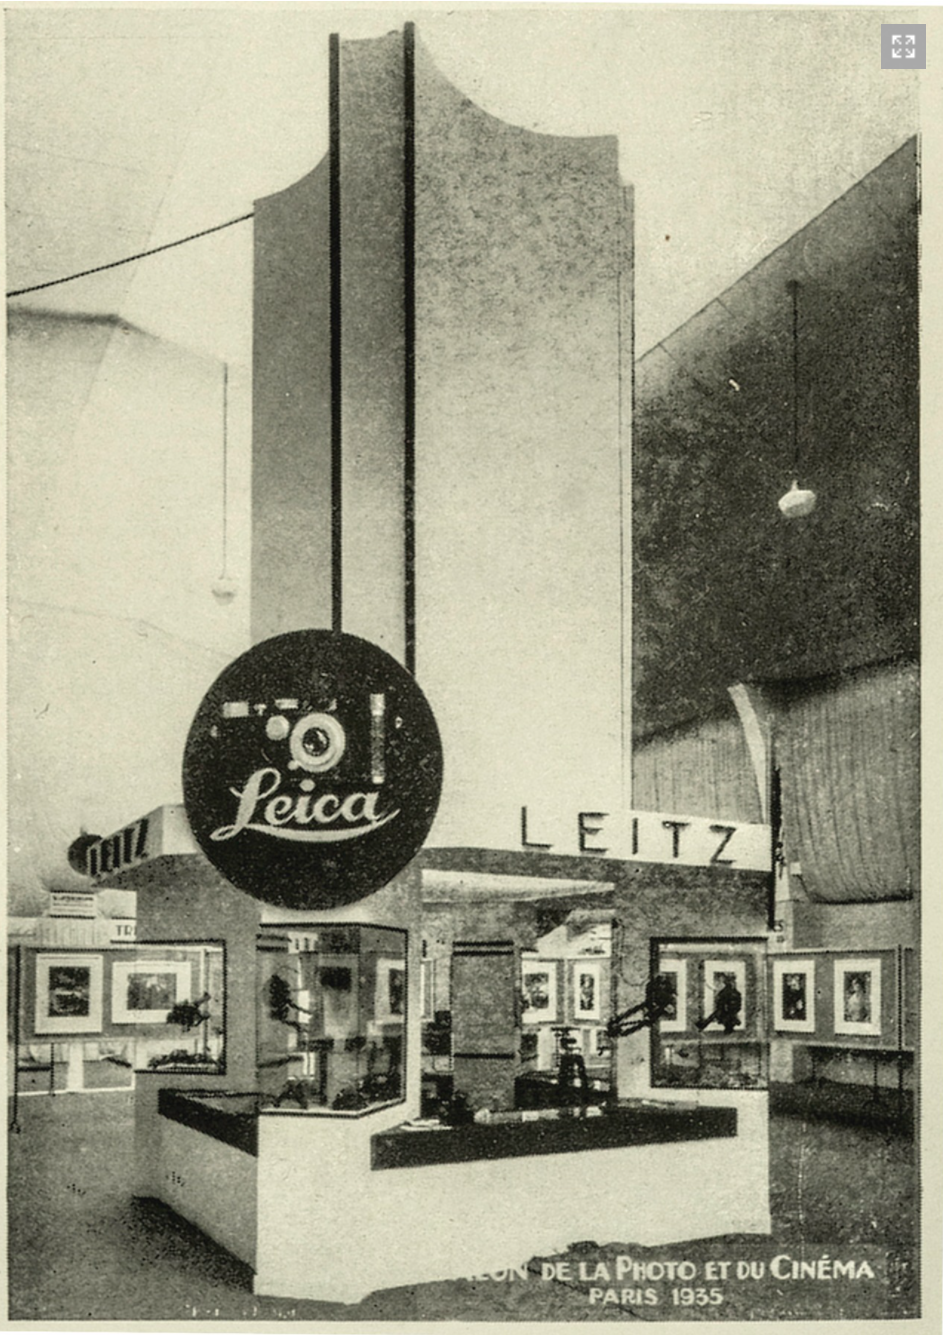 The magazine’s illustration of the Leitz photo booth, surrounded by enlargements on the walls.